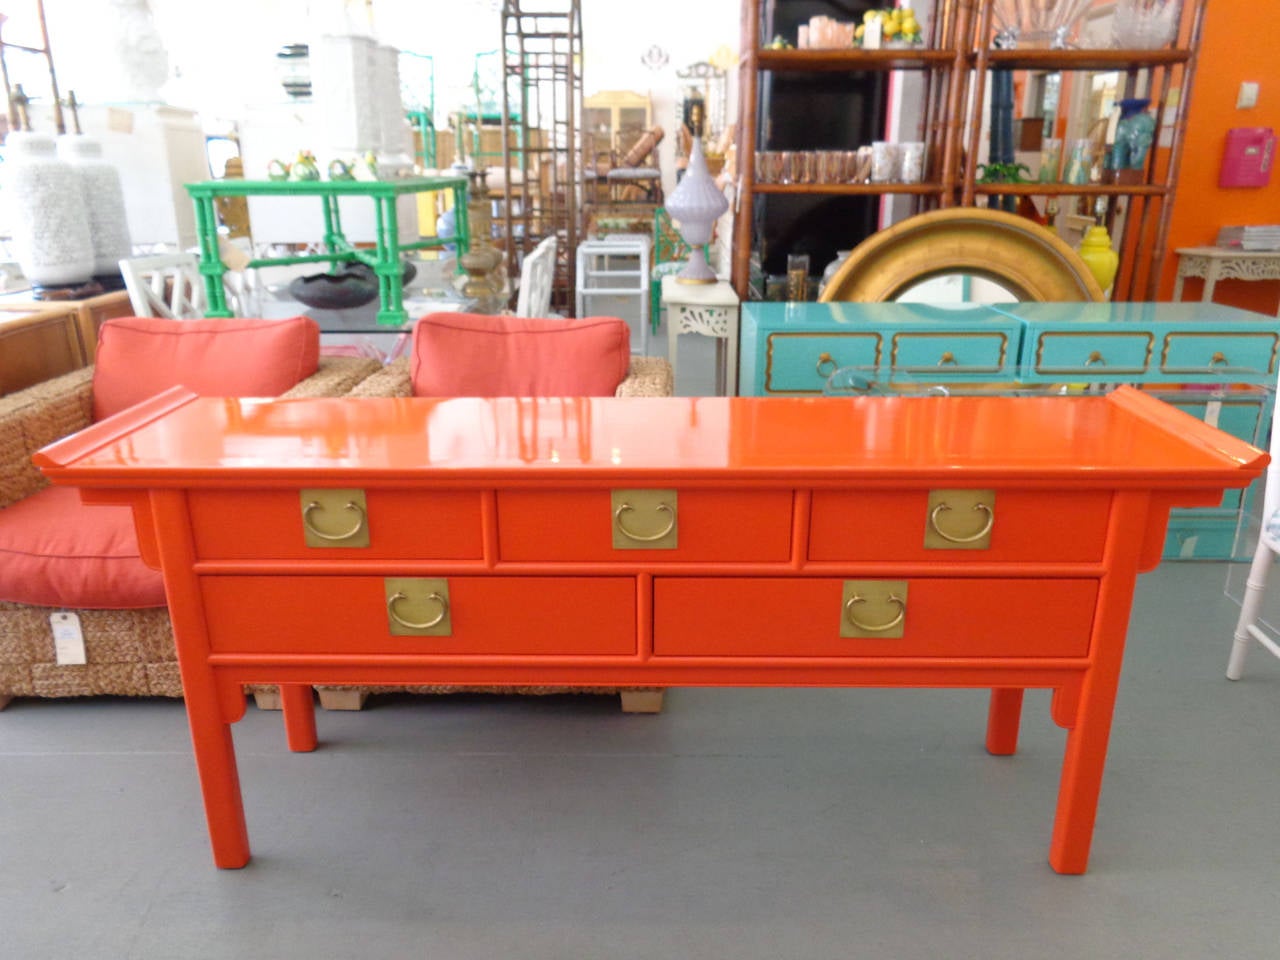 PAGODA Console in nice as found VINTAGE condition. There are minor imperfections to the NEWLY lacquered finish. Benjamin Moore Blazing Orange